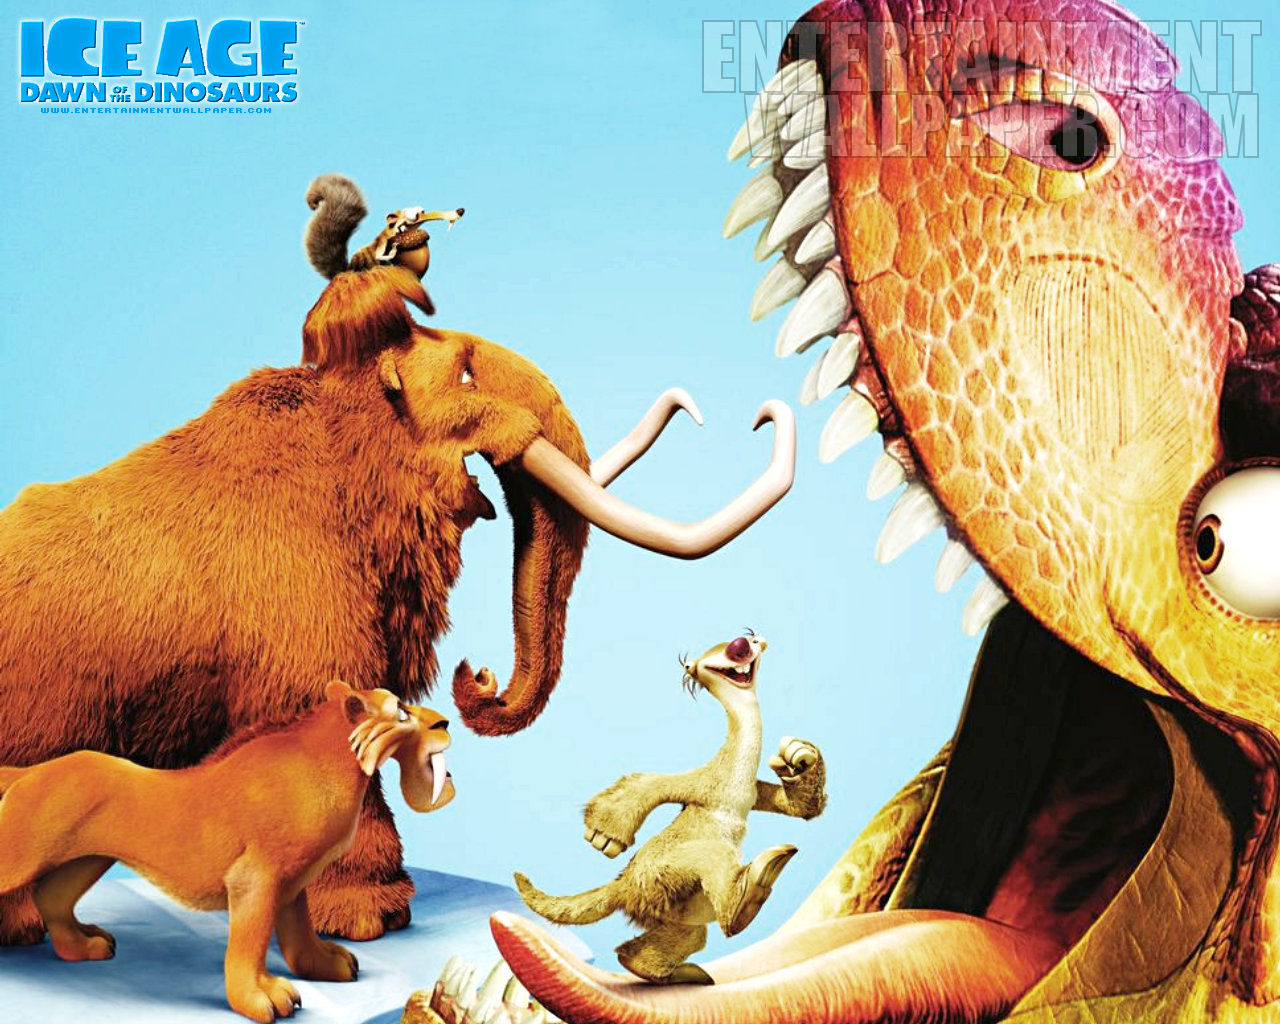 ice age 3 dawn of the dinosaurs picture, ice age 3 dawn of